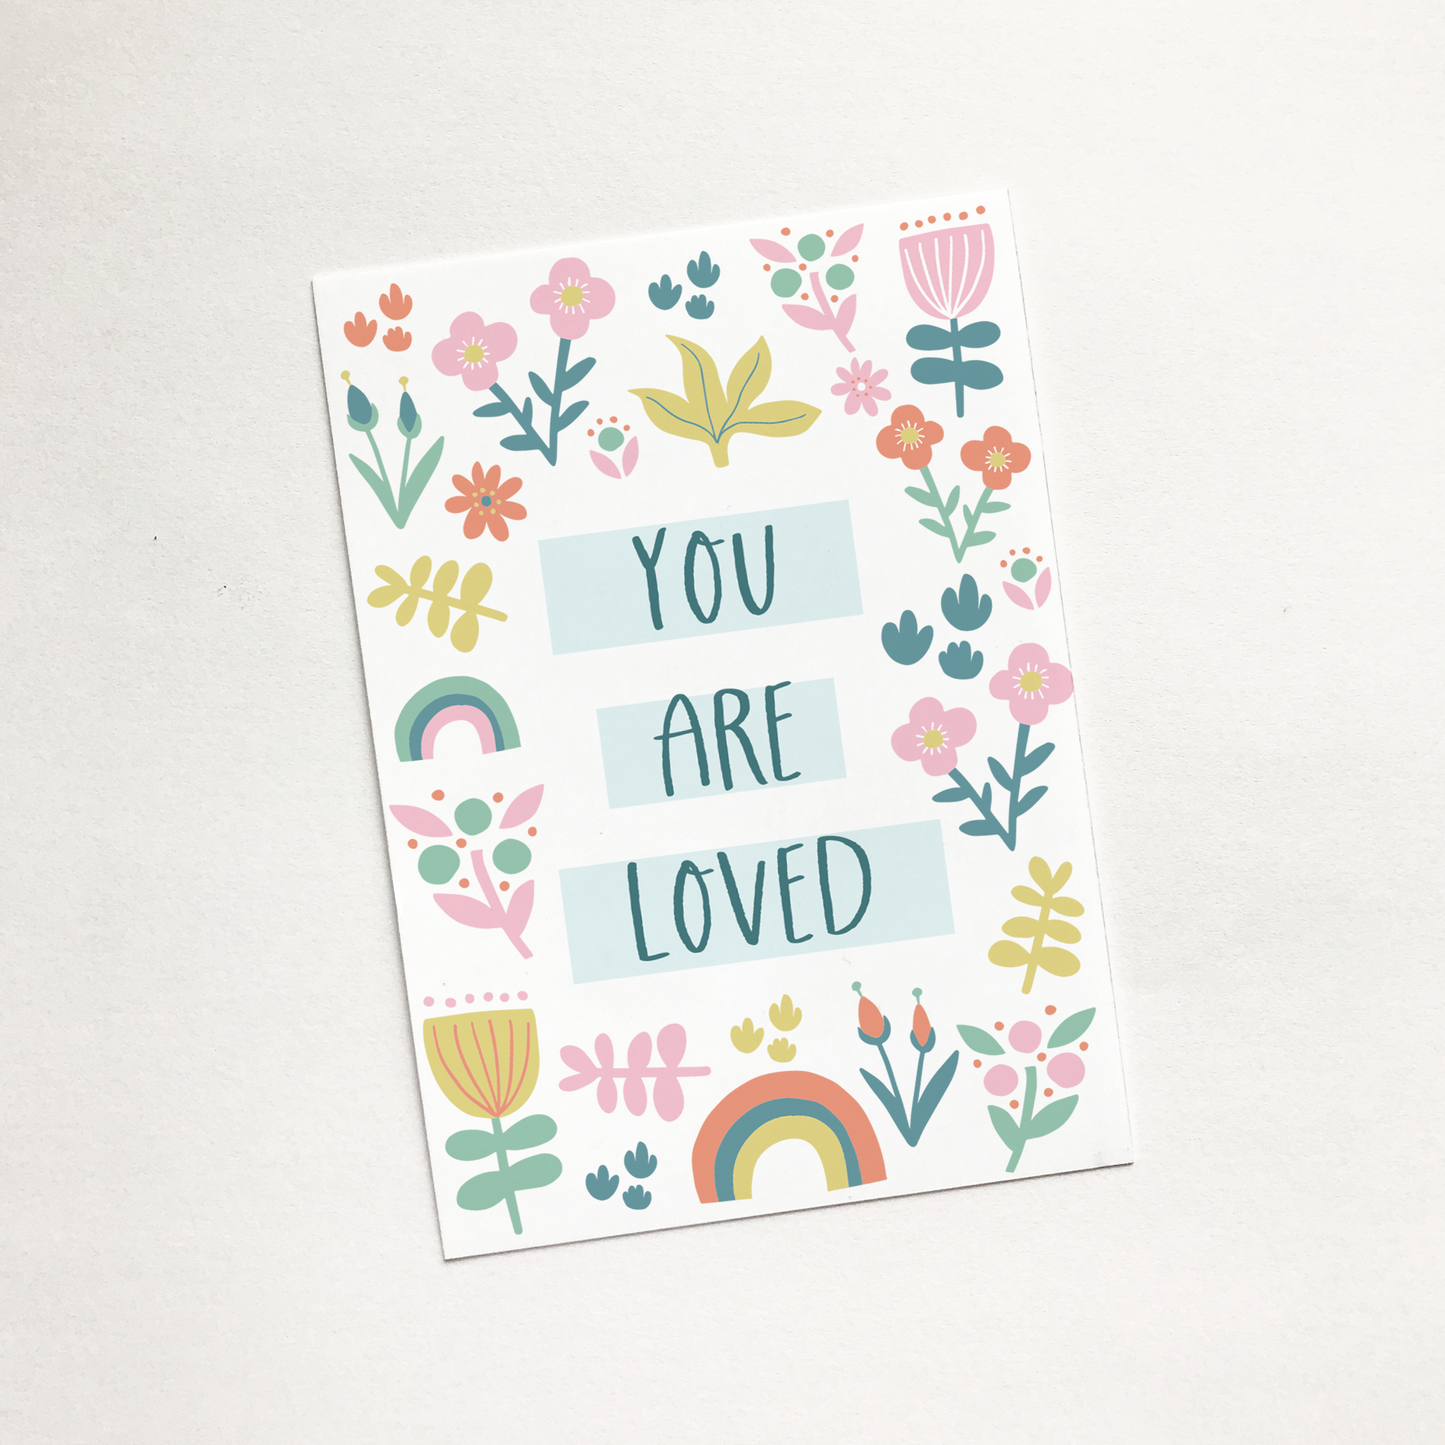 'You Are Loved' (Joy) - Christian Sharing Card